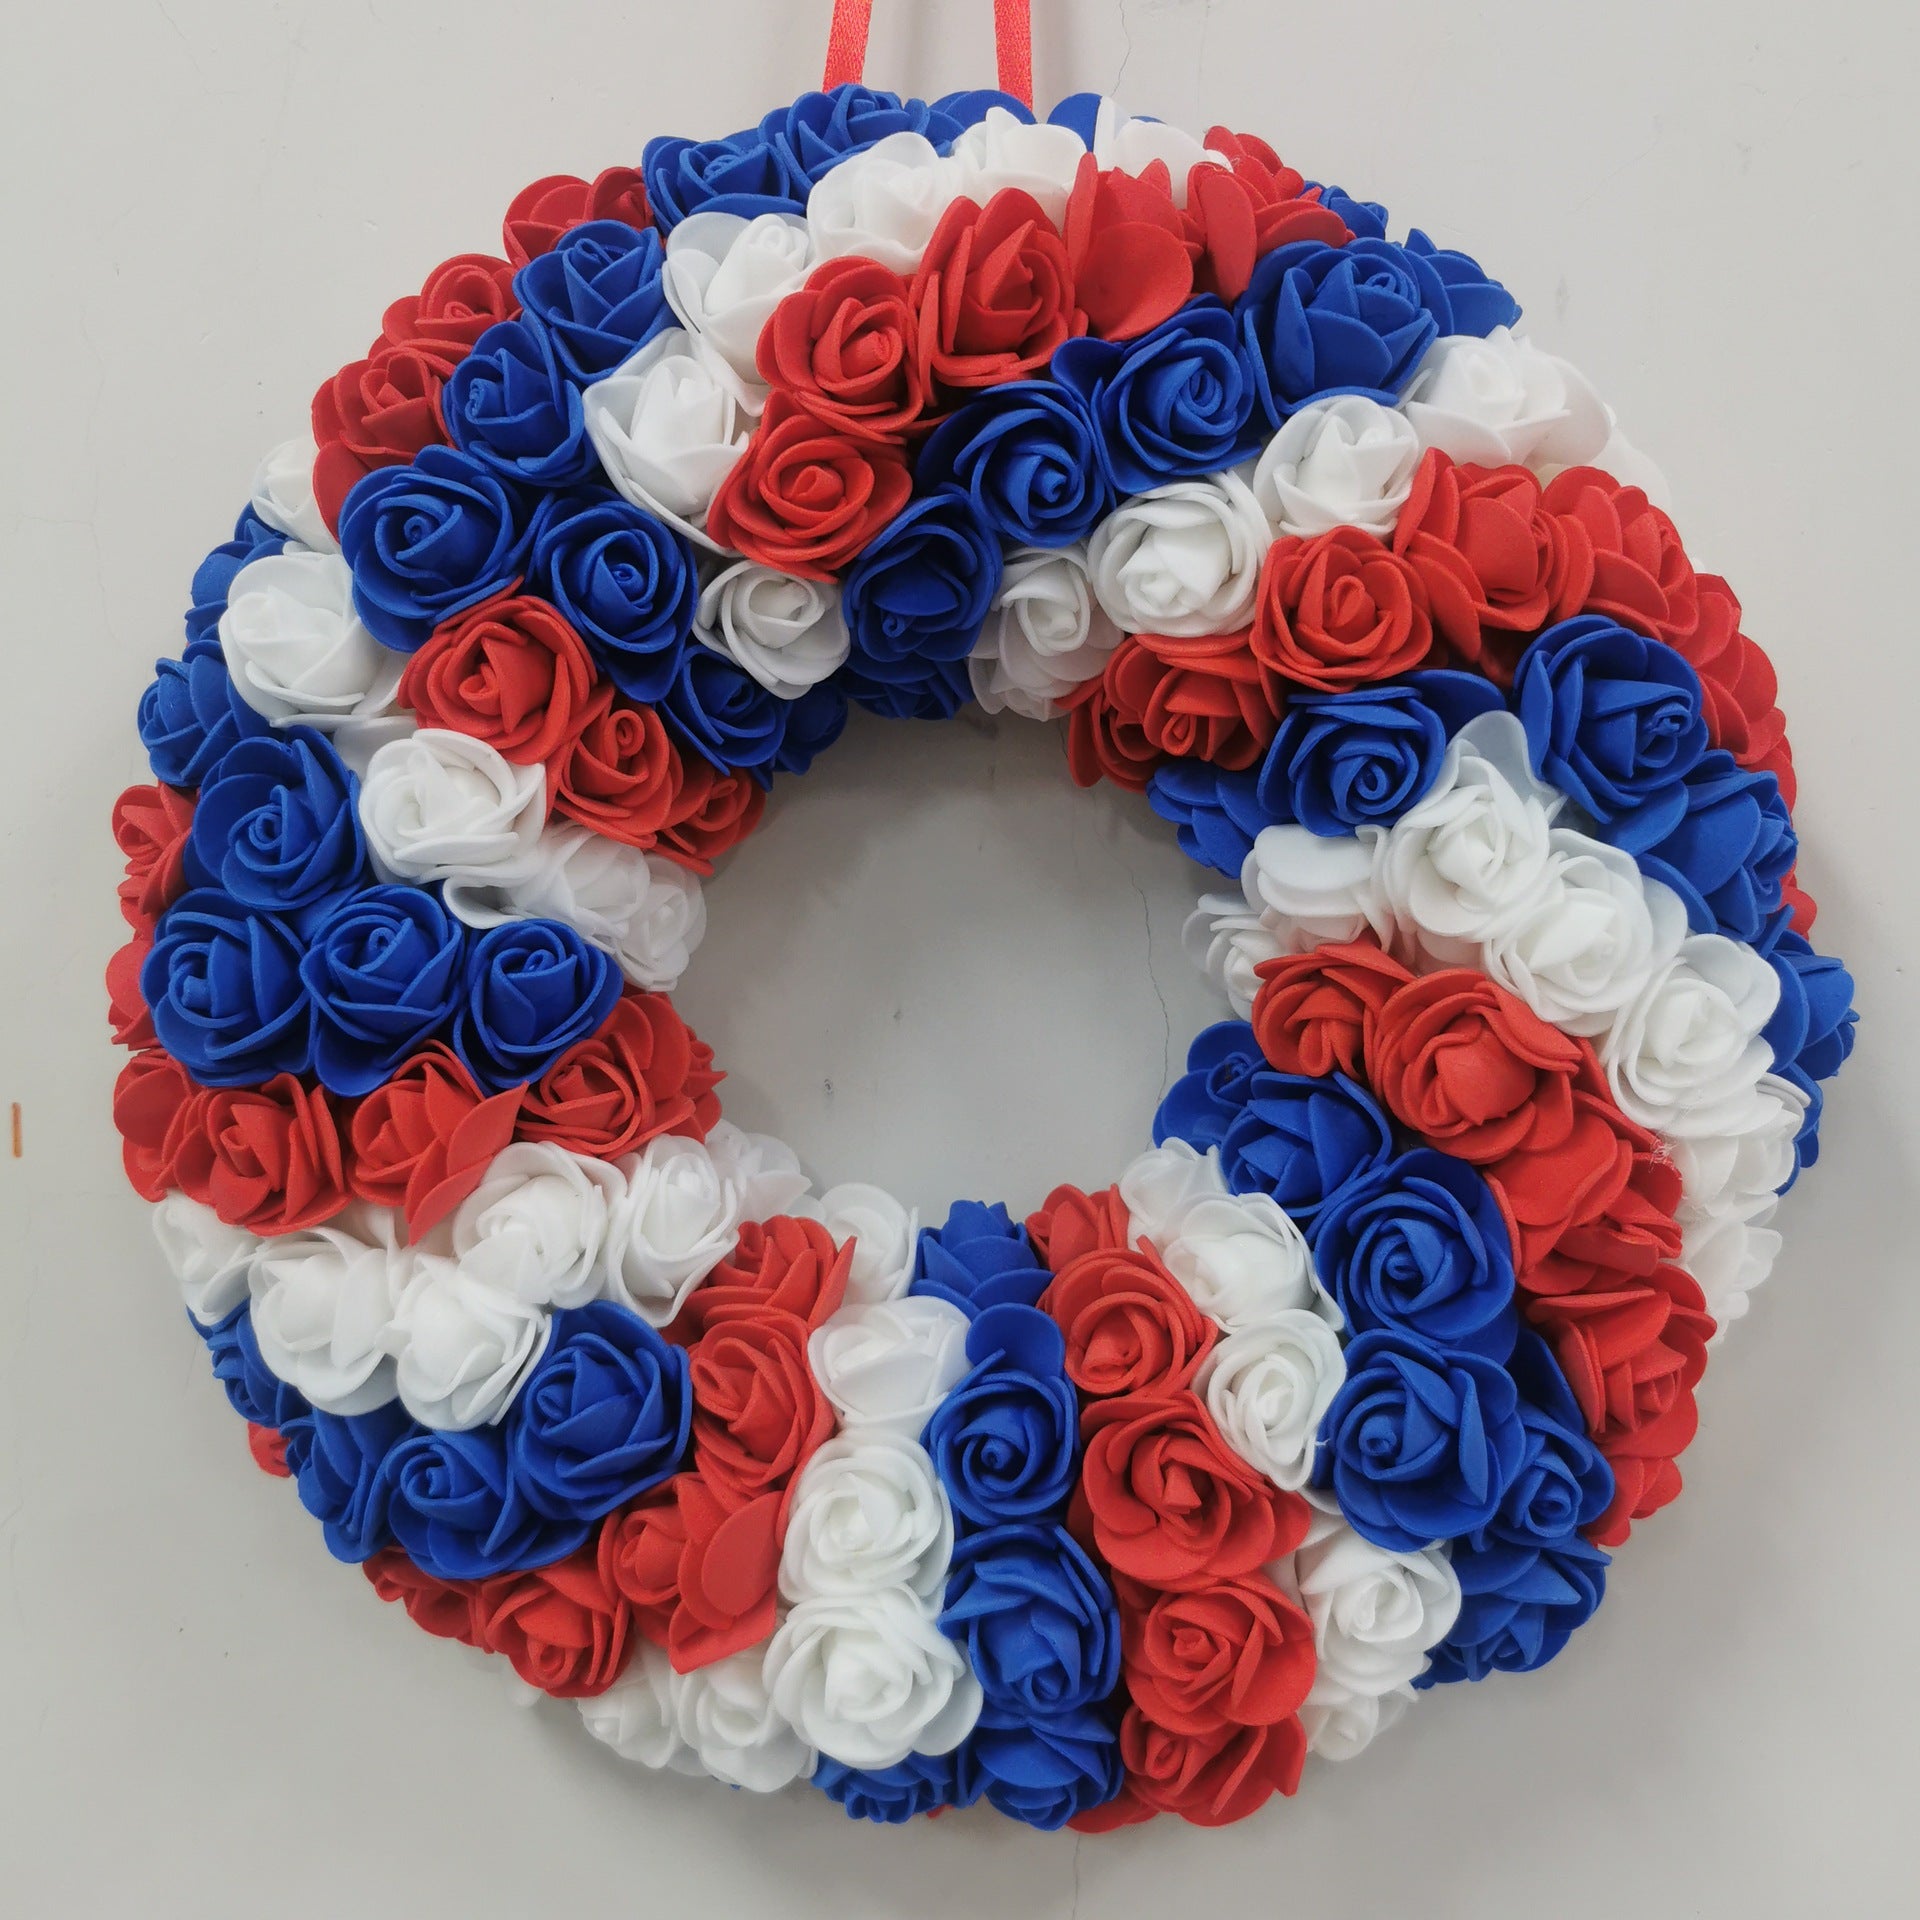 Red White And Blue Flowers For Independence Day Decoration Garland, 4th of July decorations, American flag decorations, Patriotic decorations, Red, white and blue decorations, July 4th wreaths, July 4th garlands, July 4th centerpieces, 